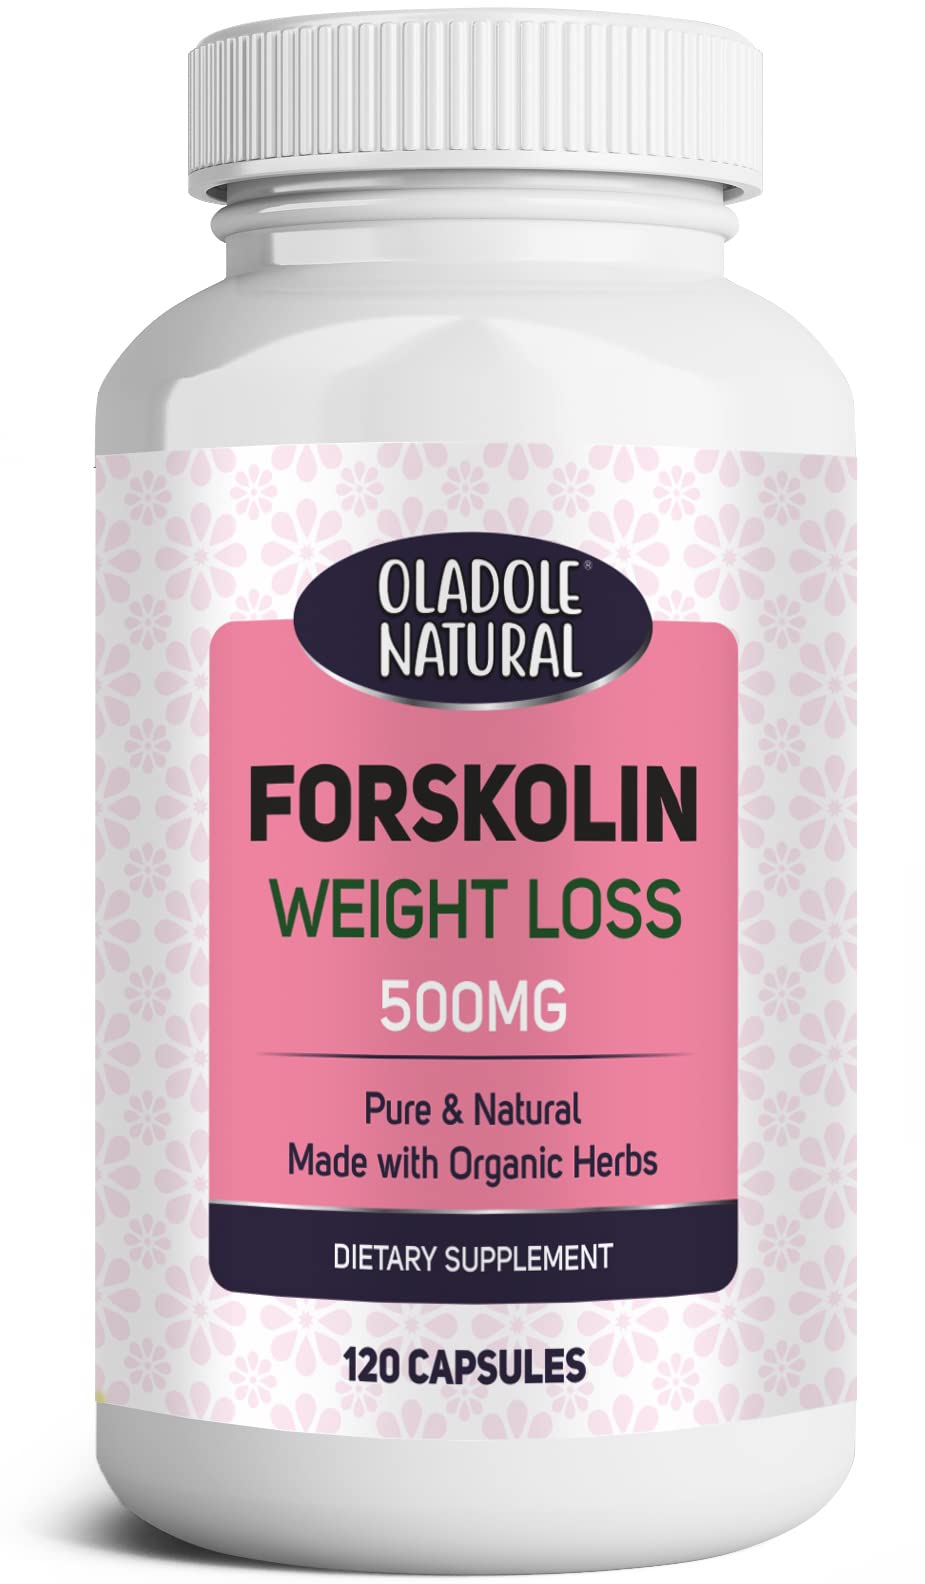 Oladole Natural Forskolin Extract for Weight Loss- 500mg | Pure & Natural Diet Pills & Belly Buster Supplement | Supports Premium Appetite Suppressant, Metabolism Booster, Carb Blocker & Fat Burner